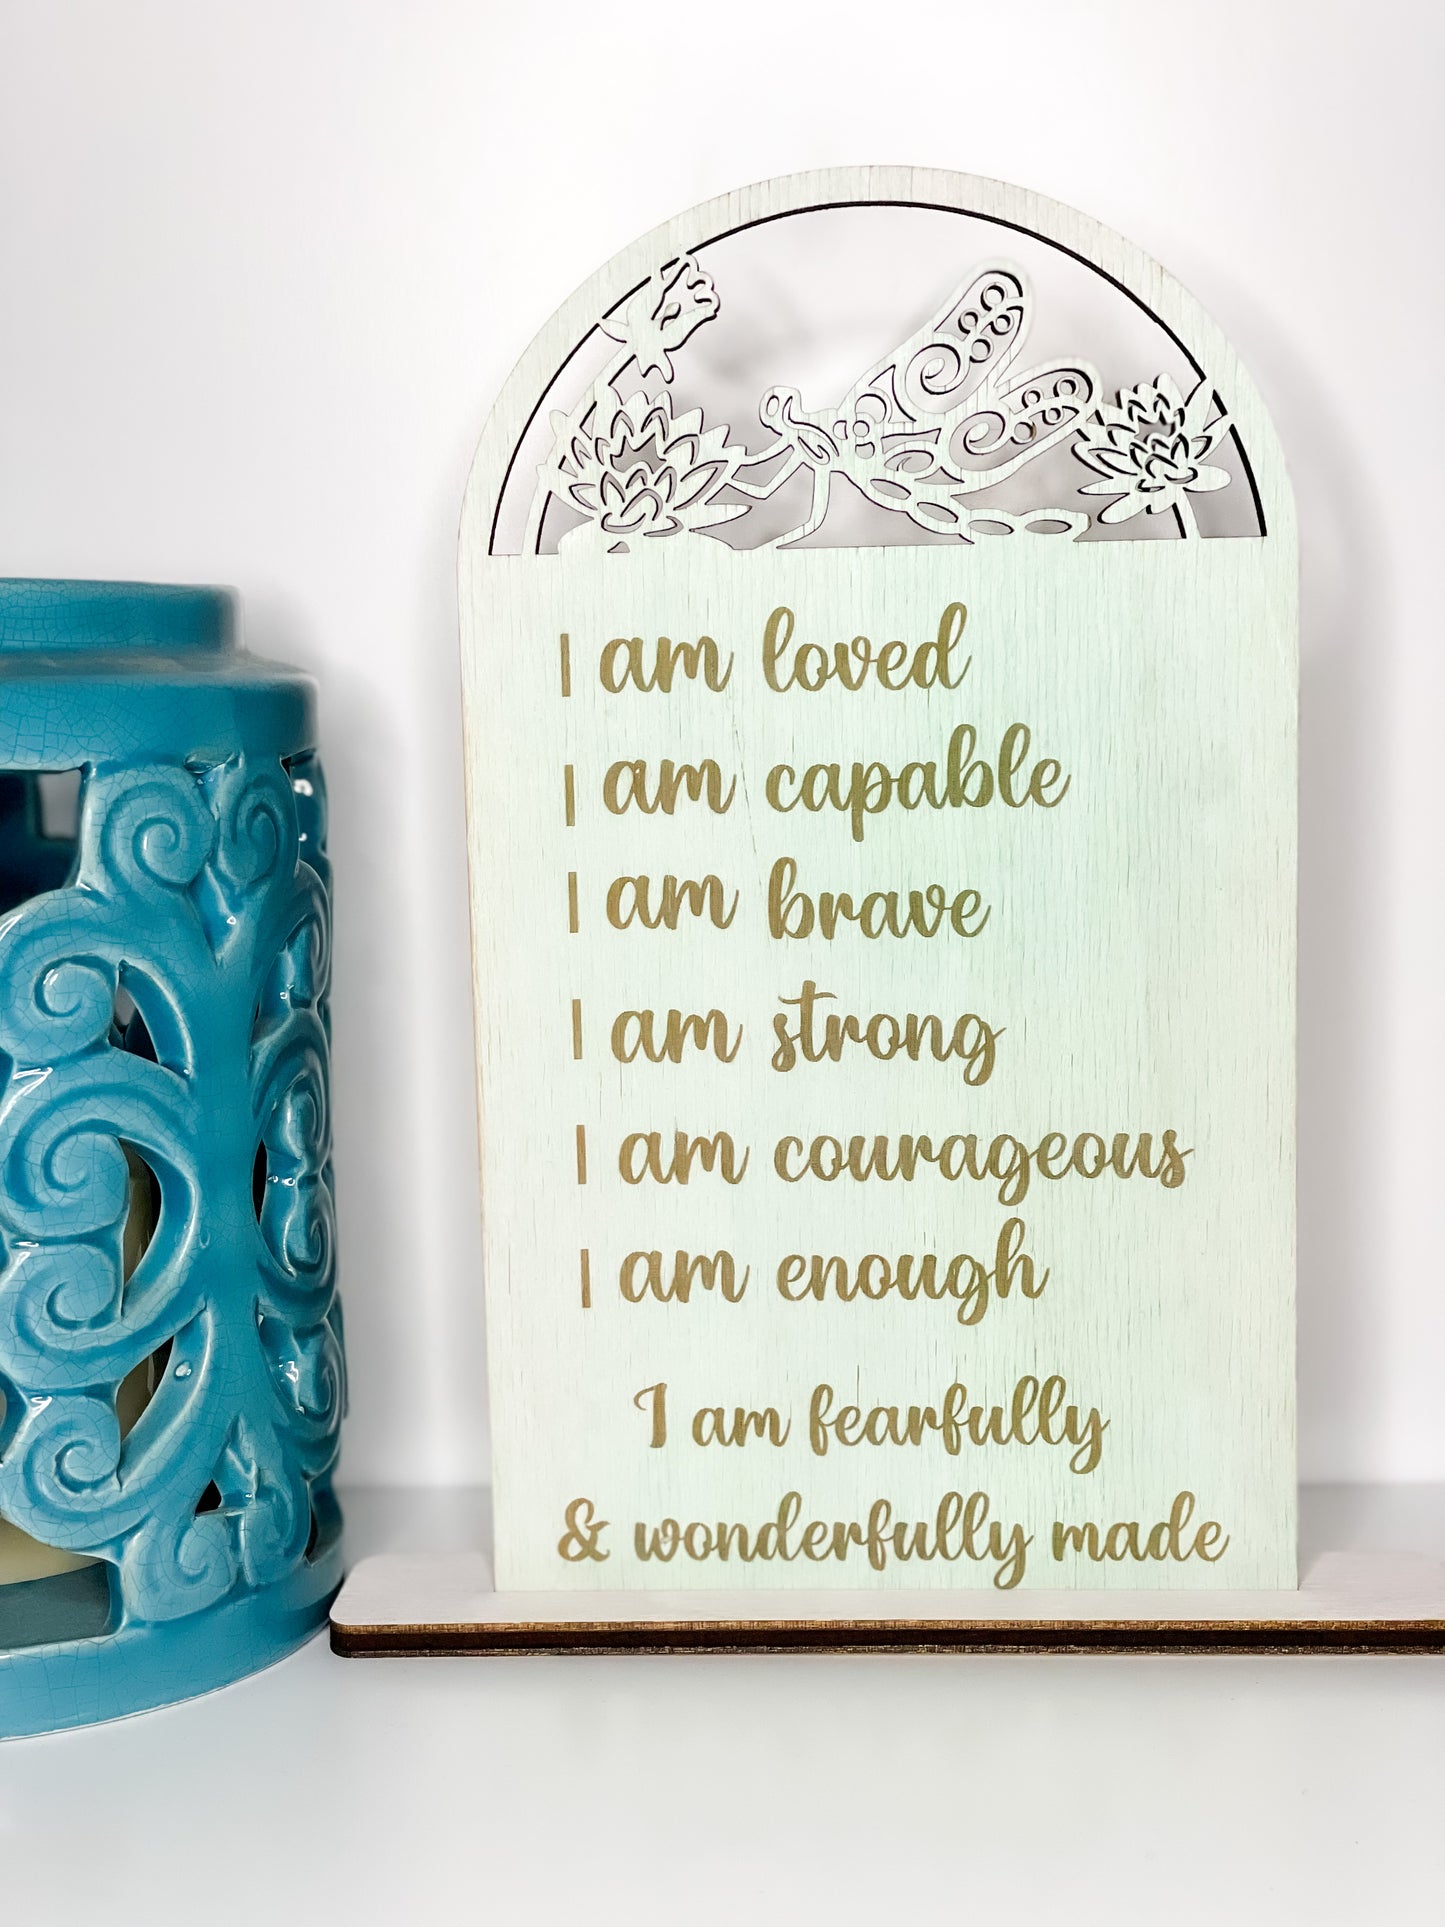 Inspire someone - Daily Affirmation - for him - for her | Perfect for a teen or tween.